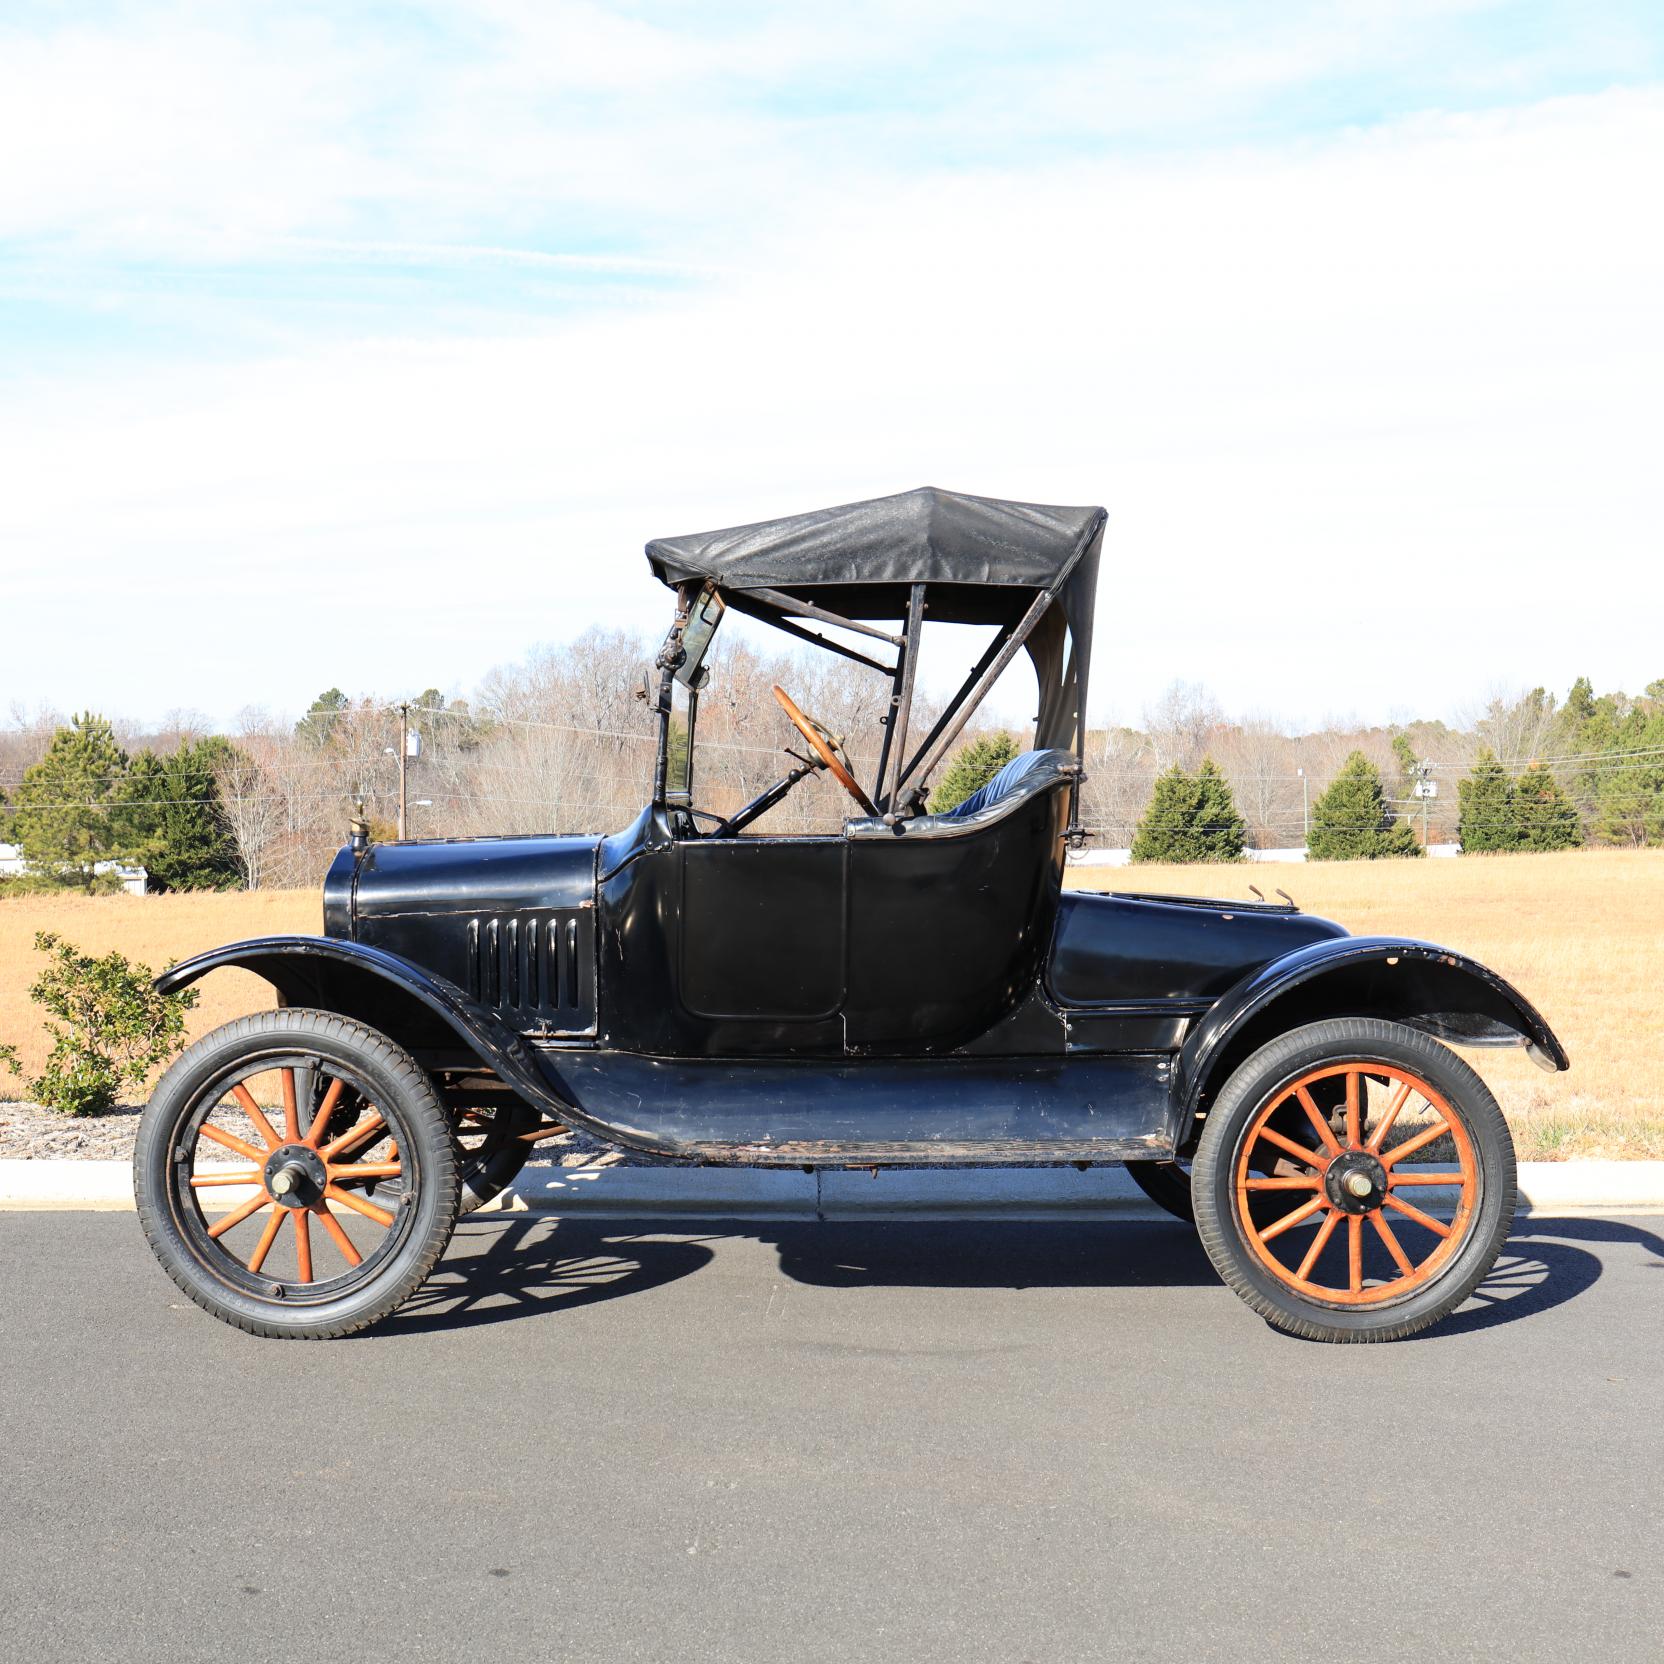 1920 Ford Model T Turtleback Runabout Roadster (Lot 219 - New Year's  Gallery AuctionJan 6, 2018, 9:00am)